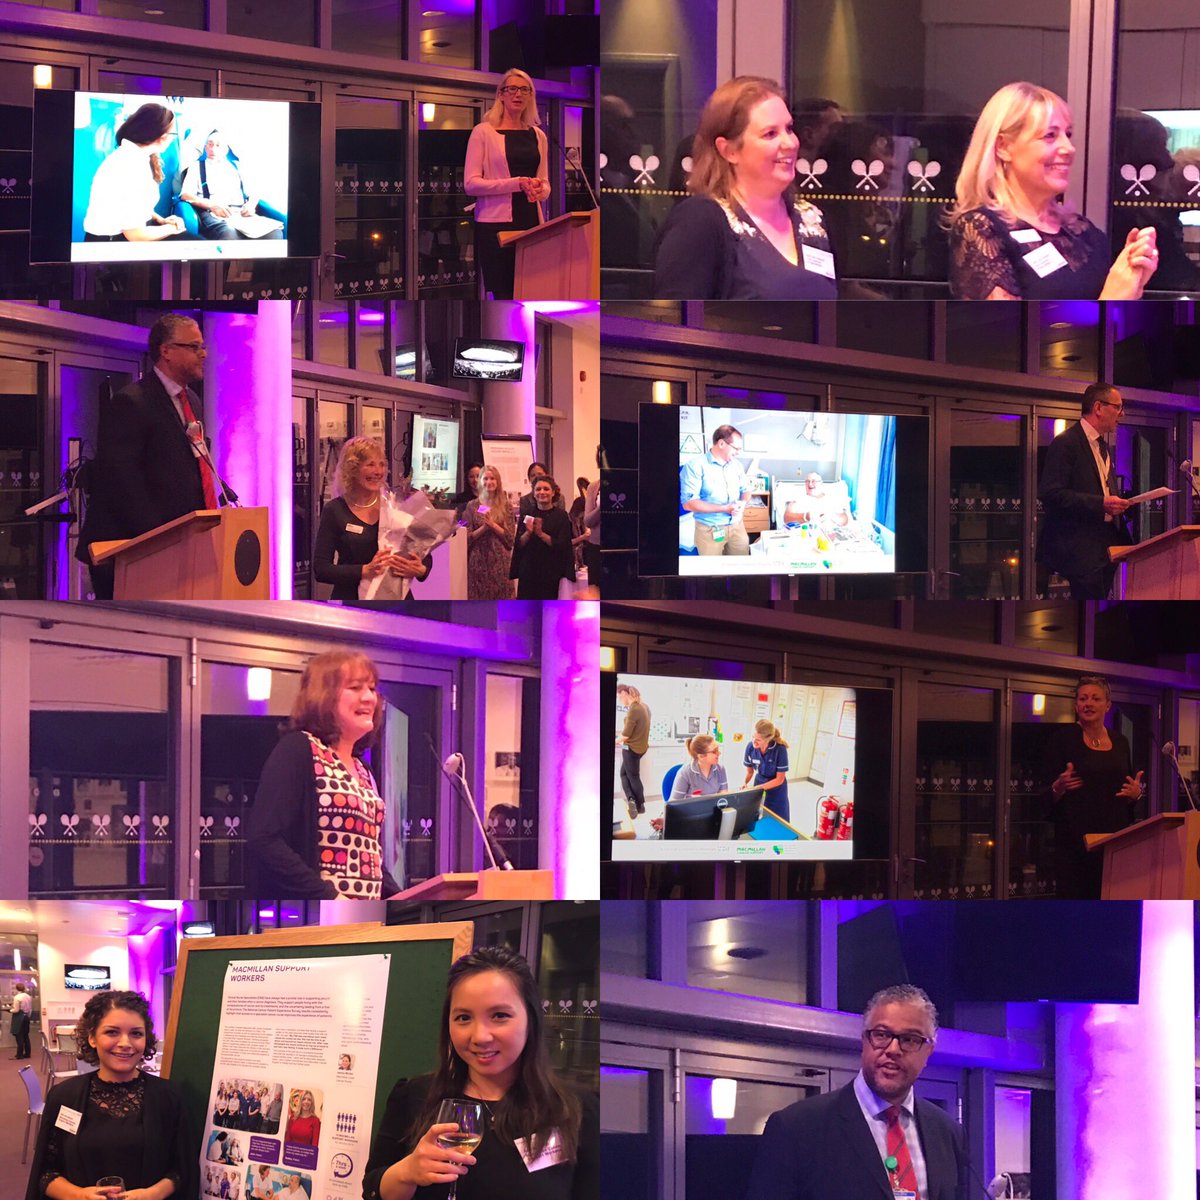 Great celebration of the successful @StGeorgesTrust & @macmillancancer #partnership 5 groundbreaking projects for our #cancer patients, inspirational passionate team delivering excellence @janiceminter04 @lynda_thomas @TotterdellJac @SNCTstgeorges #NickHyde #KatieBluer @Ed_Tallis